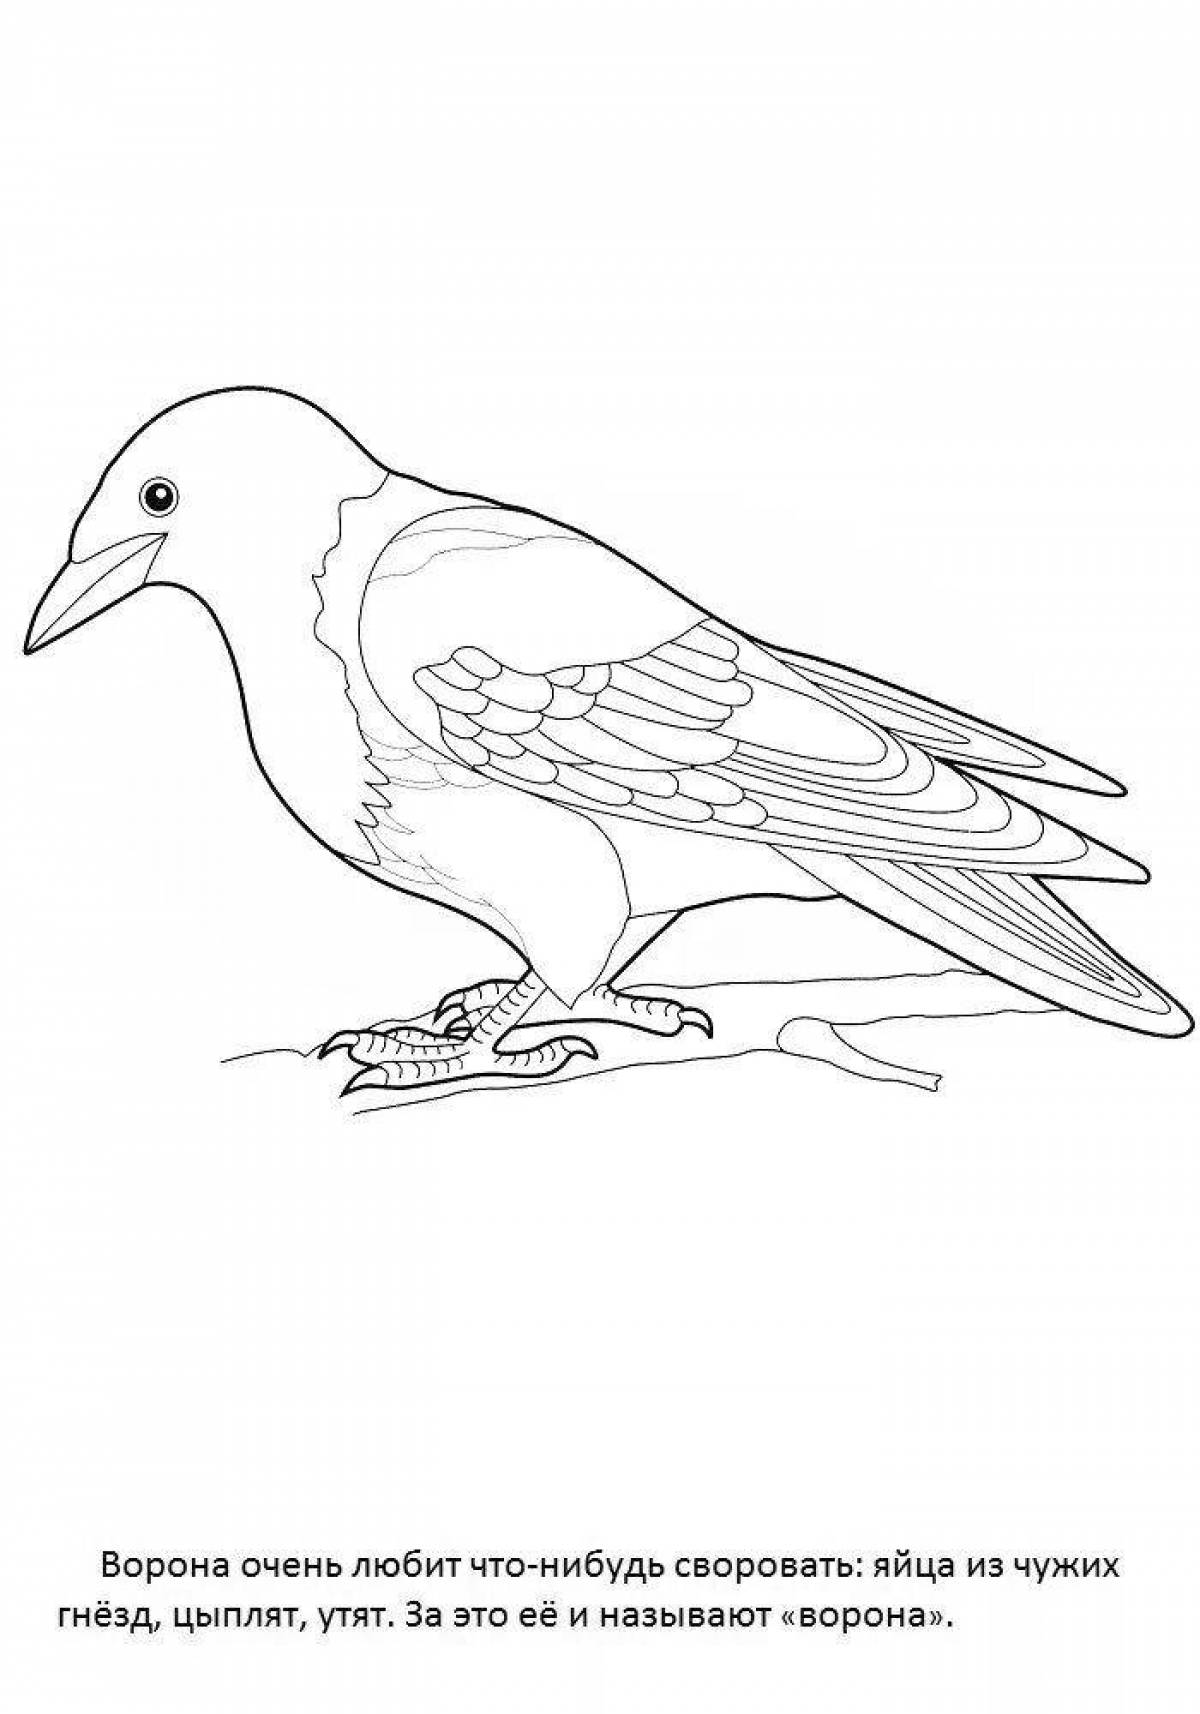 Amazing jackdaw coloring page